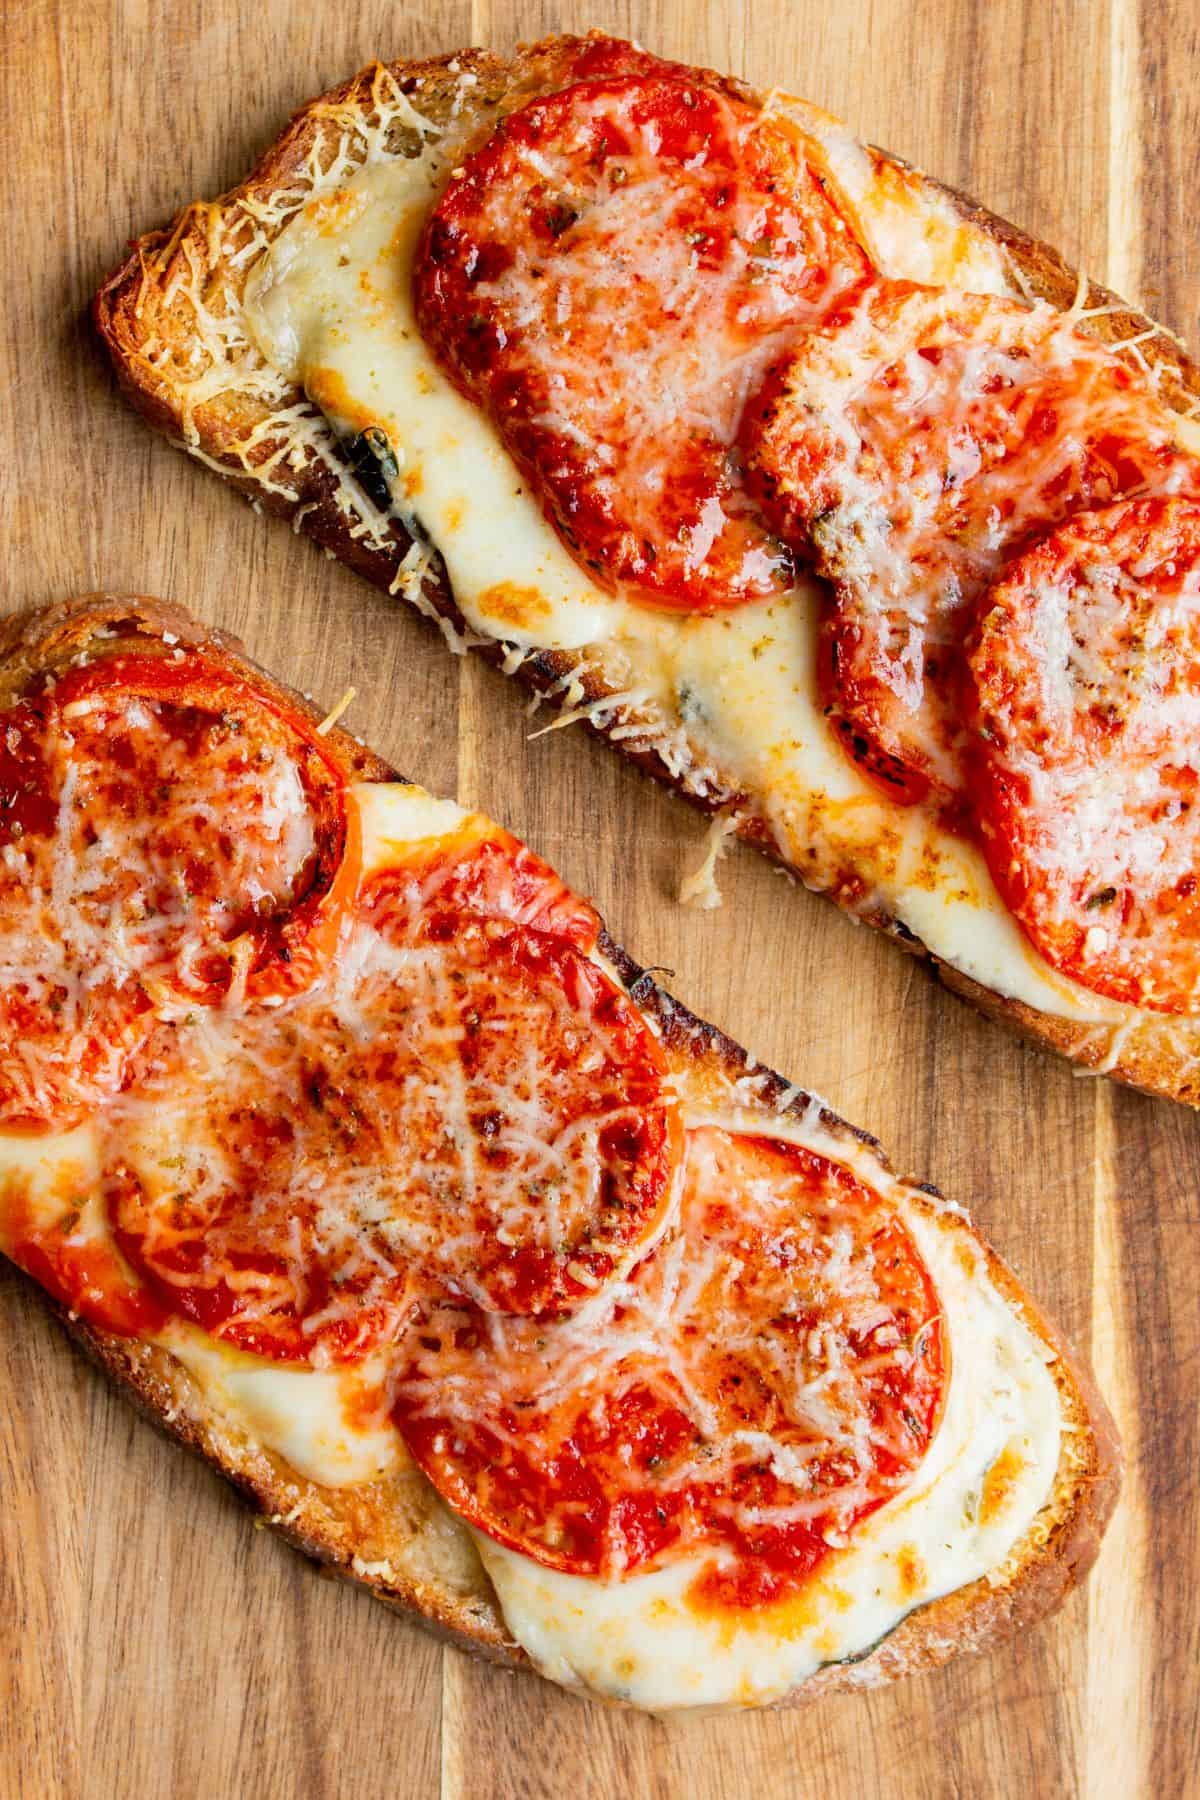 Close up of 2 pieces of pizza toast with golden browned melted cheese and roasted tomatoes on a wooden board.